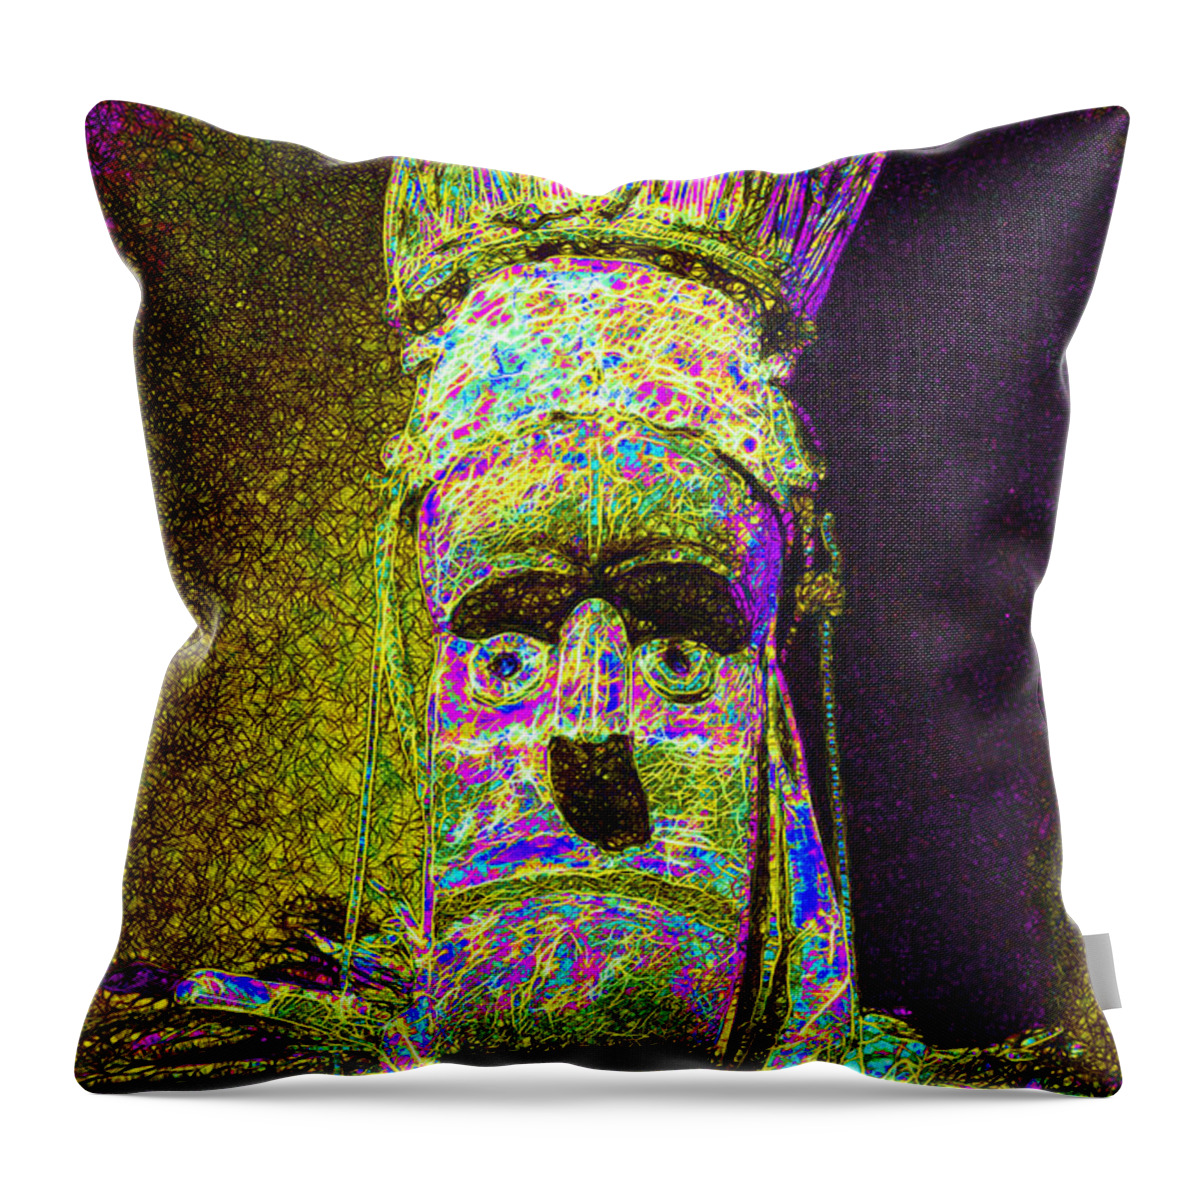 Religion Throw Pillow featuring the photograph The Shaman 20130201p50 by Wingsdomain Art and Photography